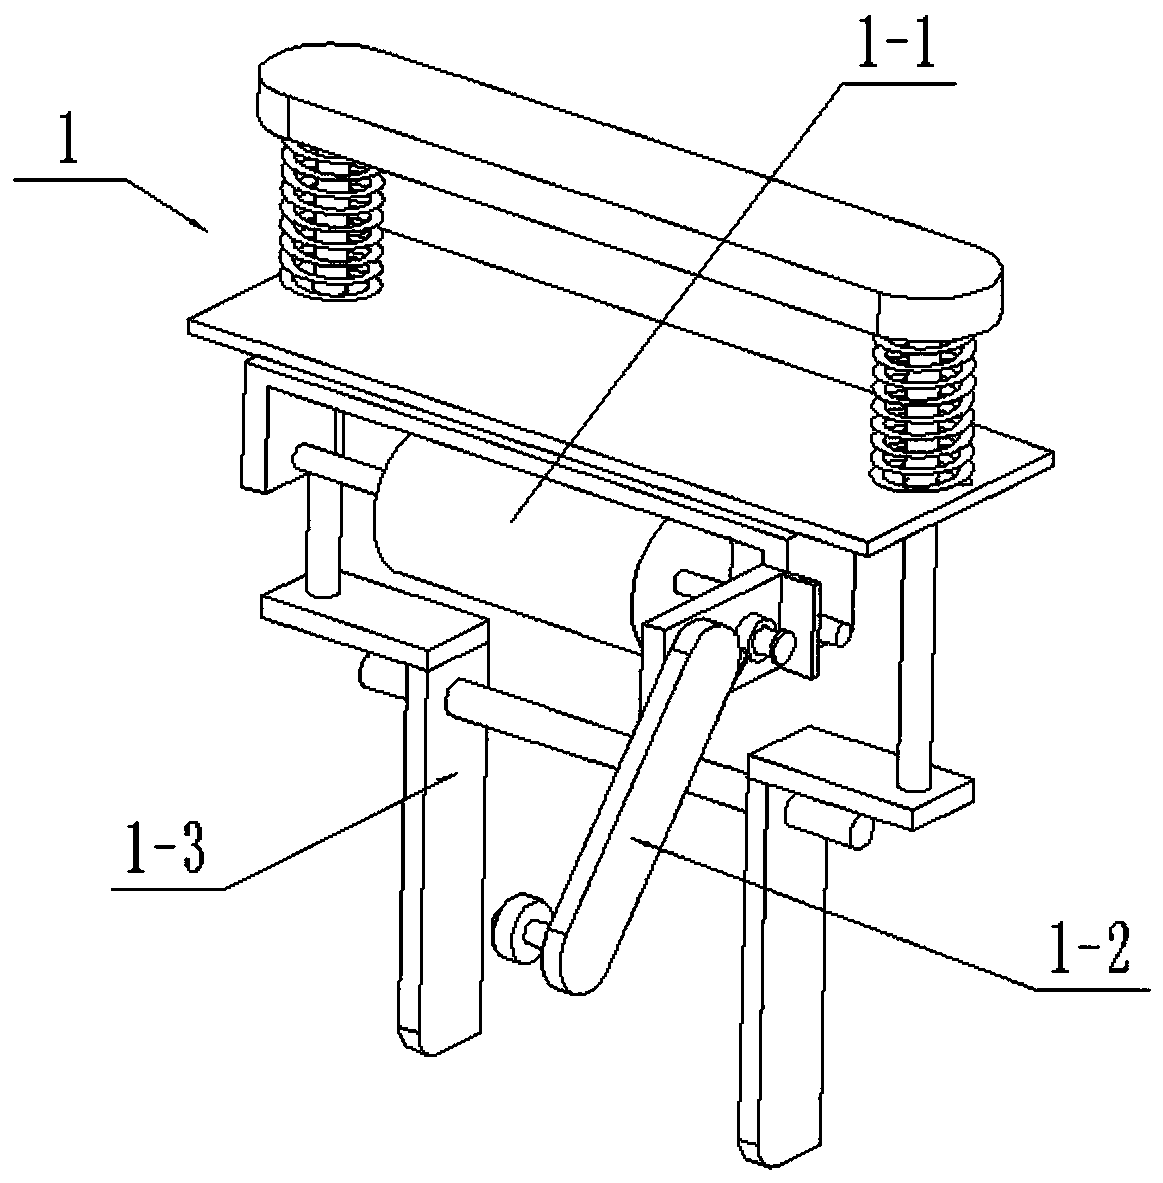 Unwinding and stacking device for roll cloth with anti-loosening